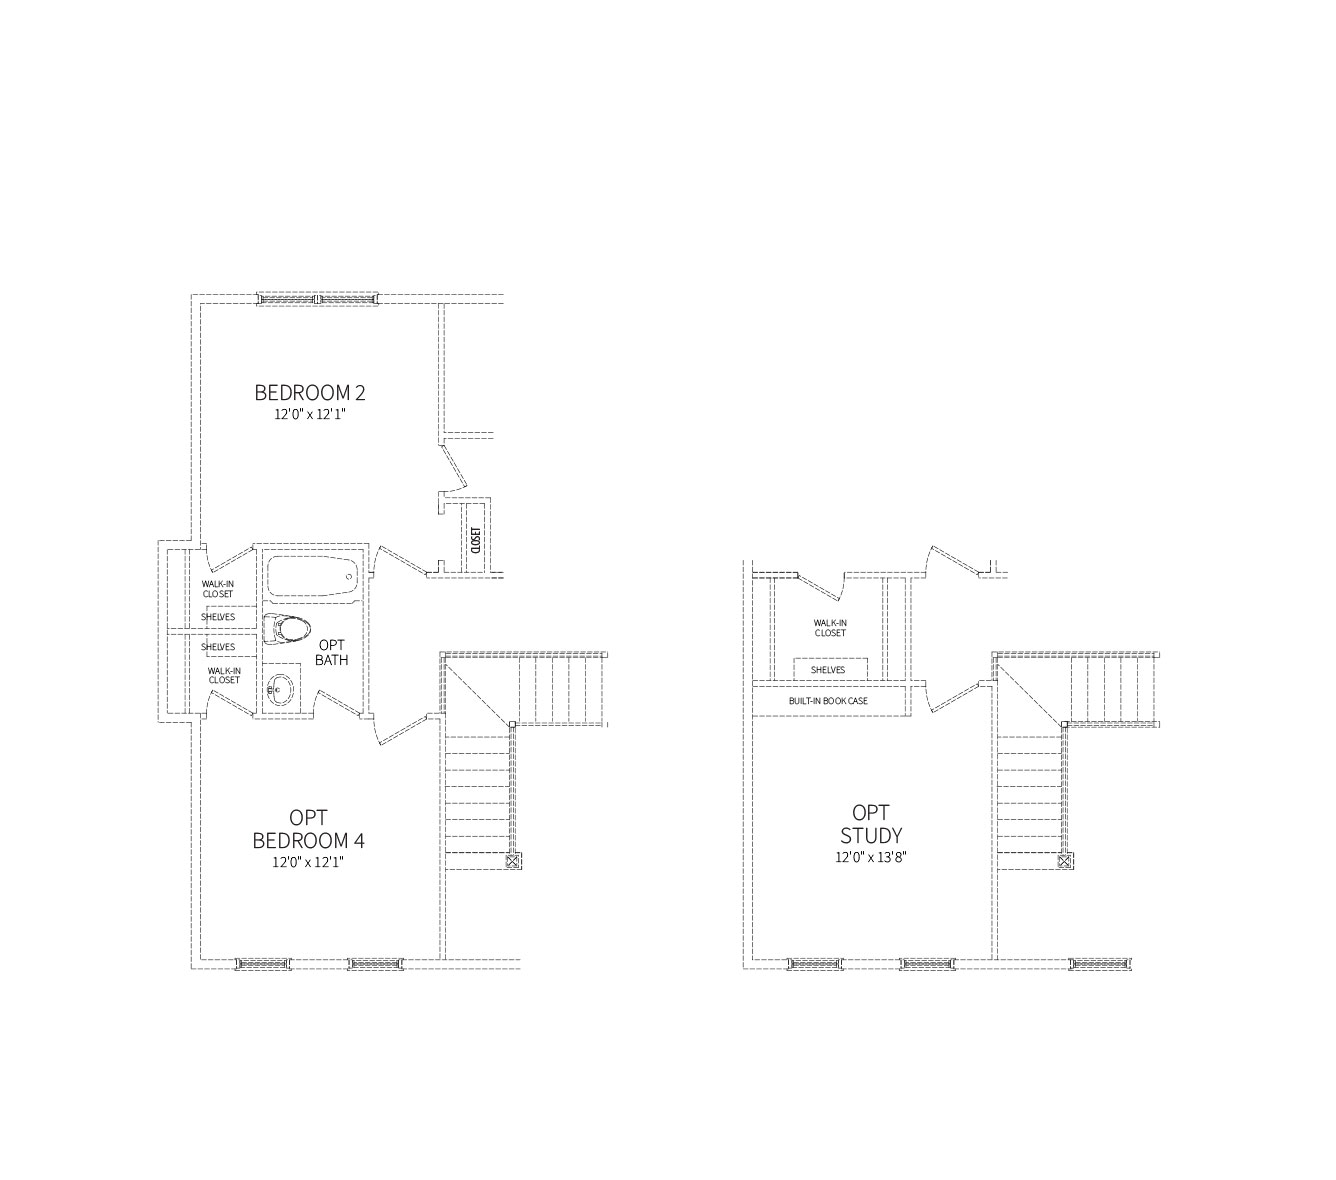 Partial floor plans showing alternative layouts for the secondary bedrooms upstairs in the McLean model.